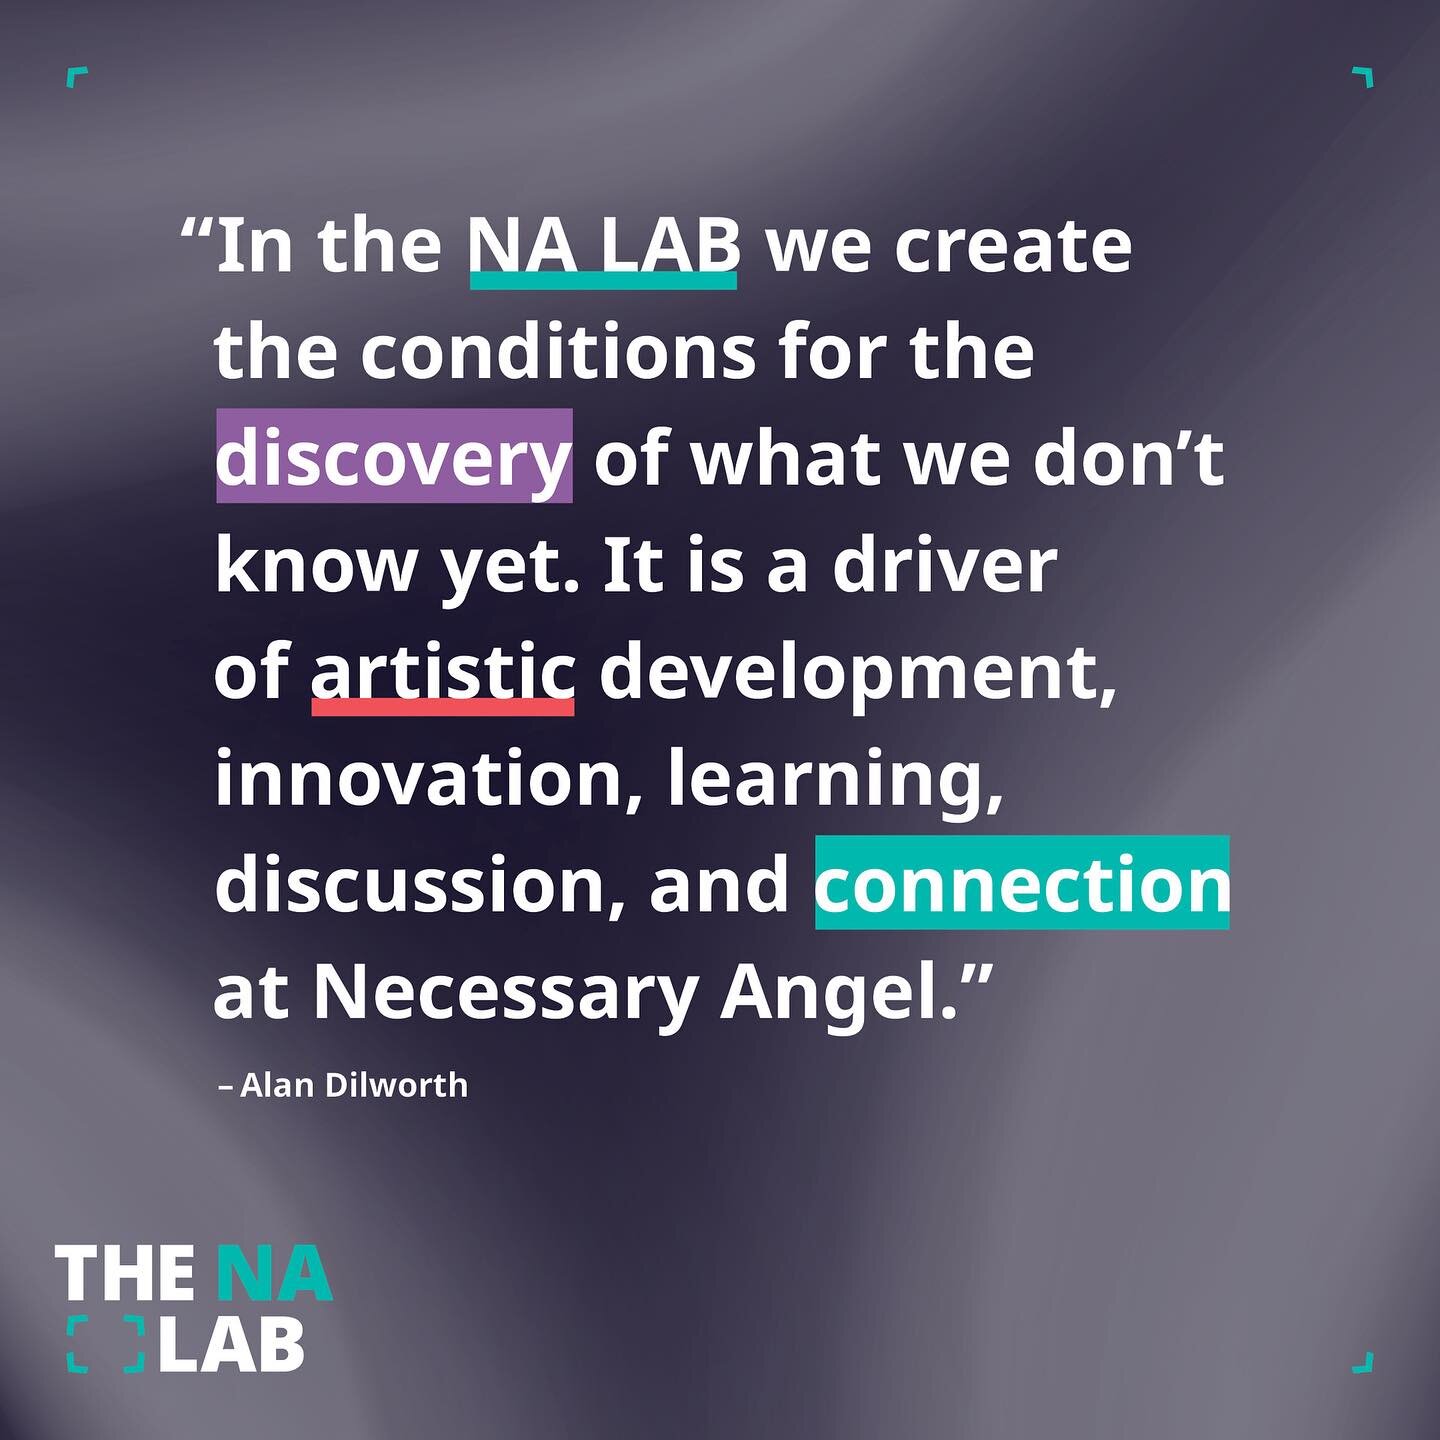 We are thrilled to announce the launch of Necessary Angel&rsquo;s NA LAB: our new artistic platform for creative activity in support of artists and their artistic development. The LAB offers opportunities for artists to engage in residency programs, 